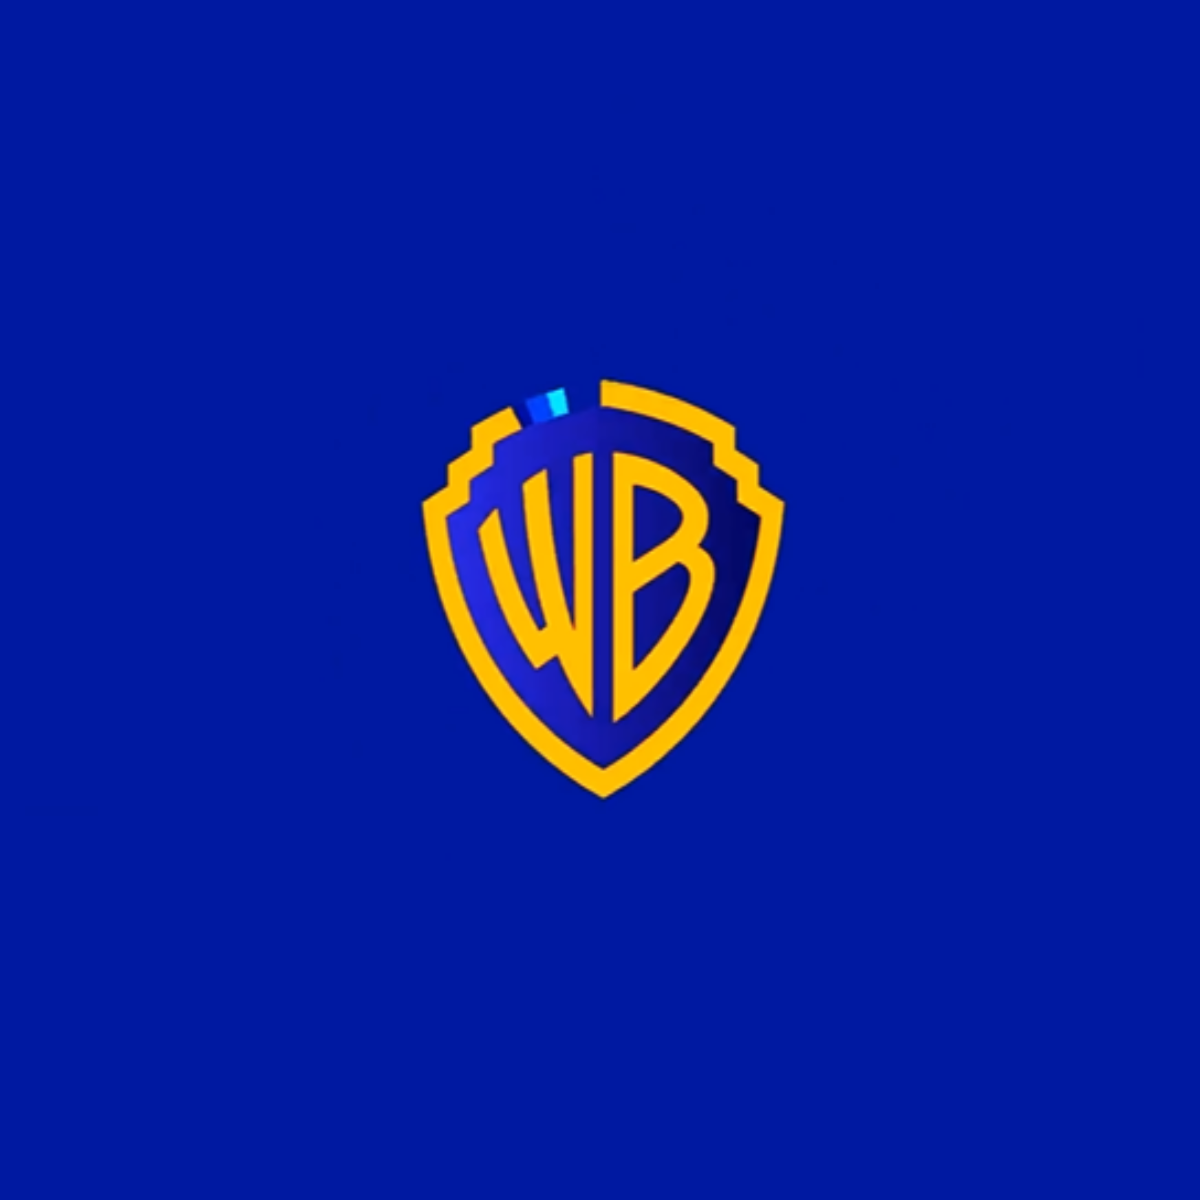 warner bros: Warner Bros. Discovery is sacking staff, say reports